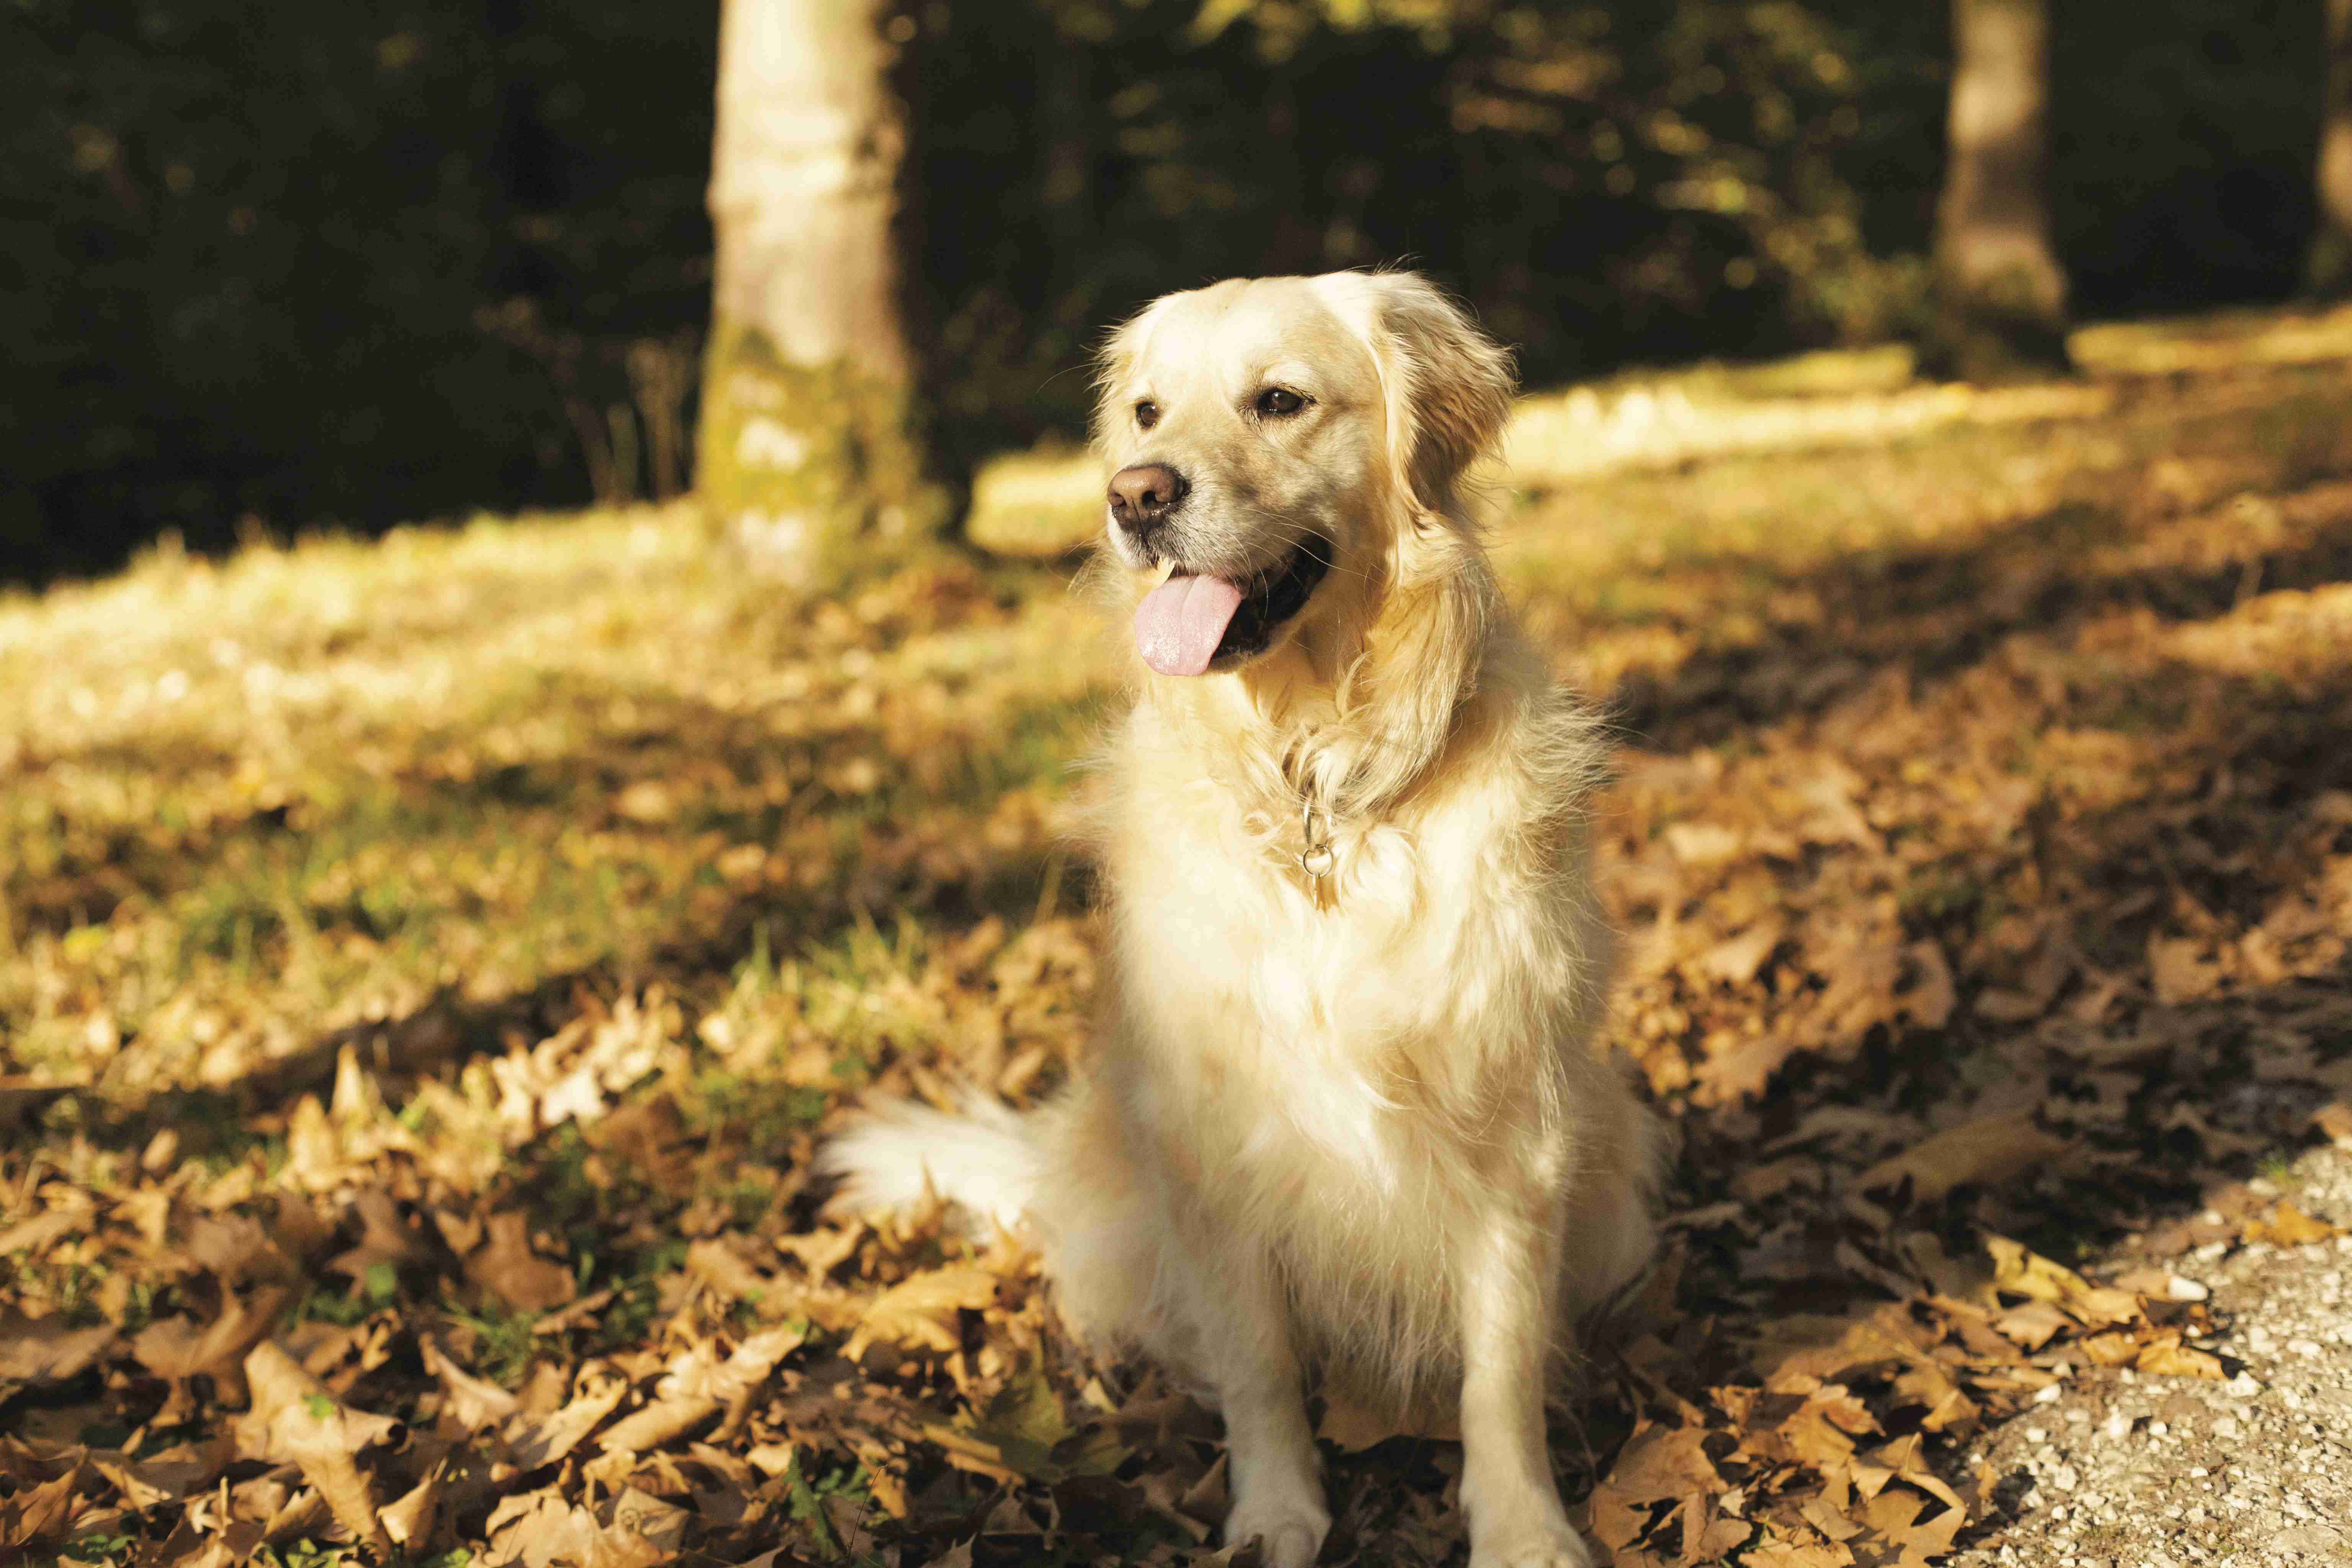 How can I prevent obesity in my golden retriever?